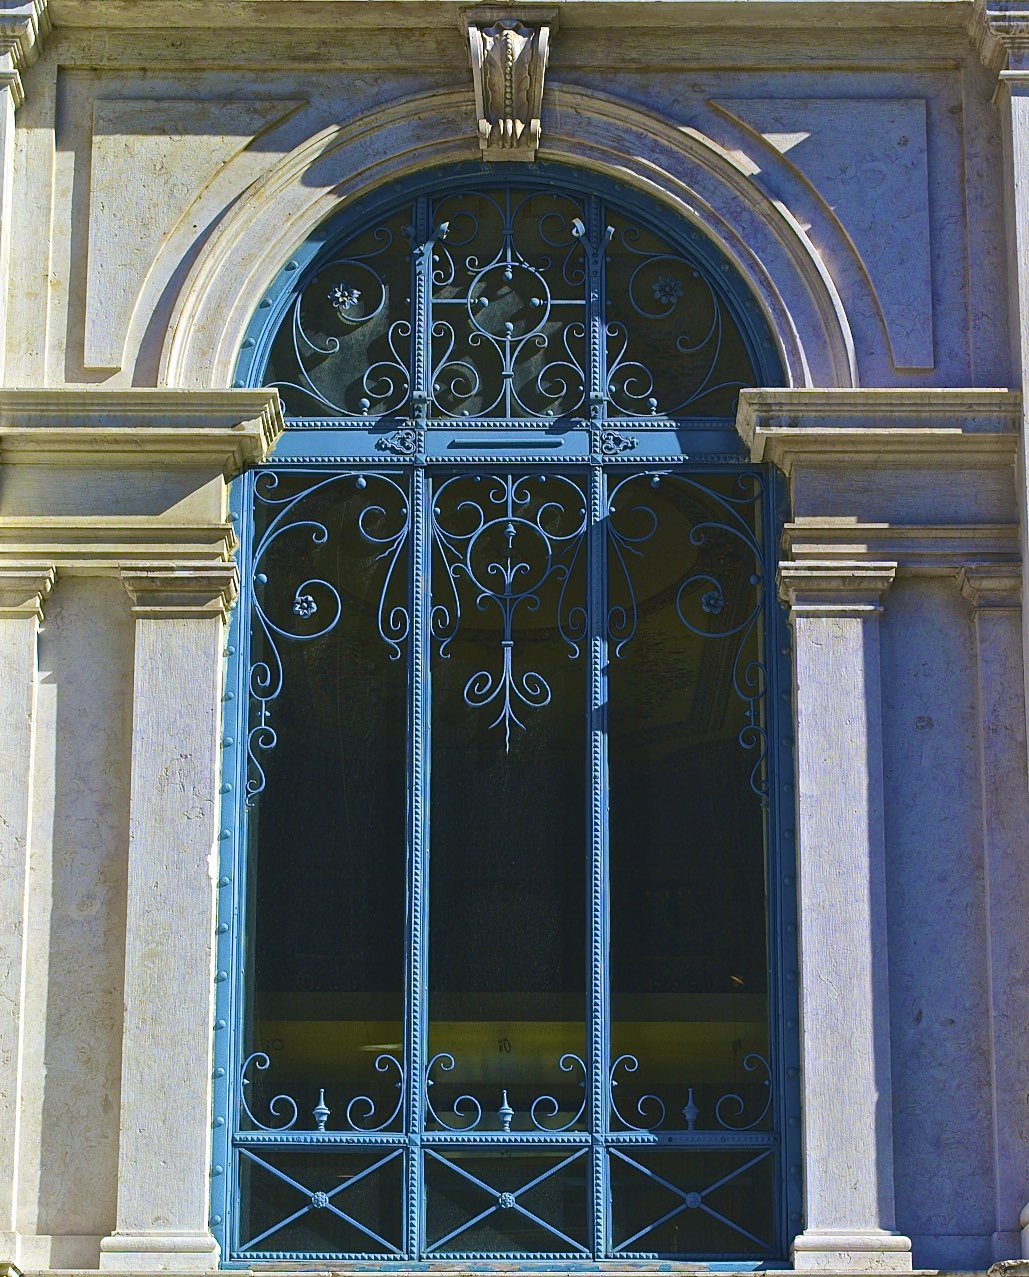 an ornate window and the side of a building